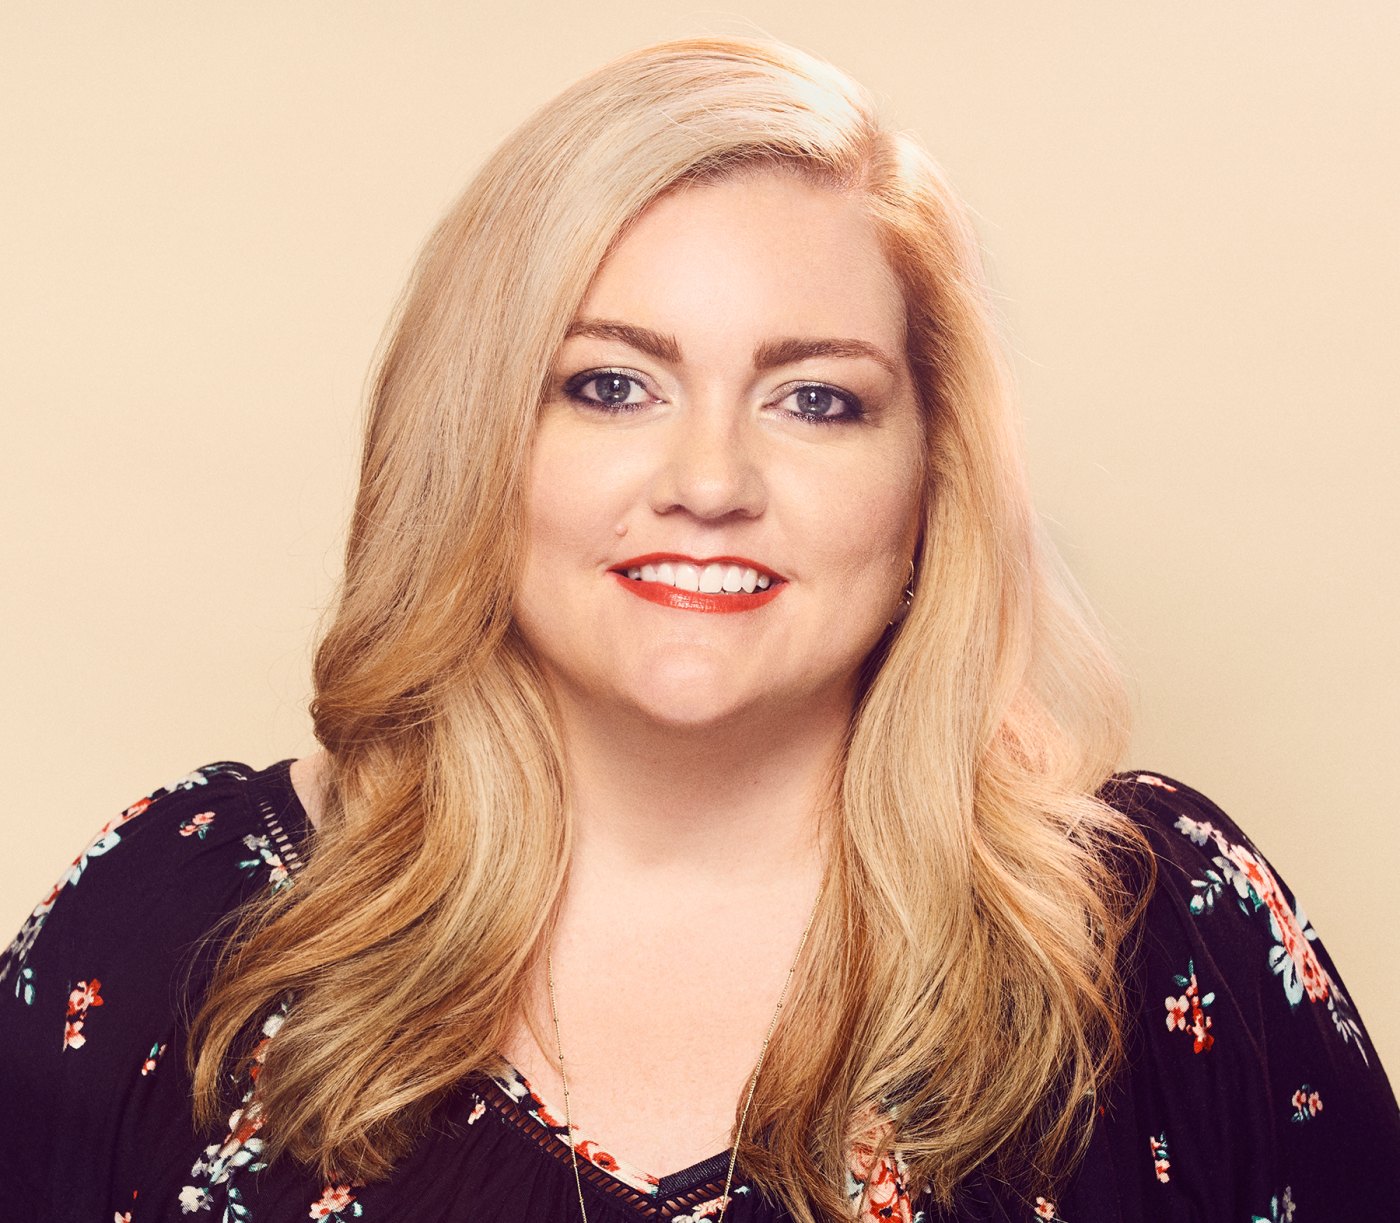 Colleen Hoover Reveals Cover and Excerpt of ‘All Your Perfects’ UsWeekly